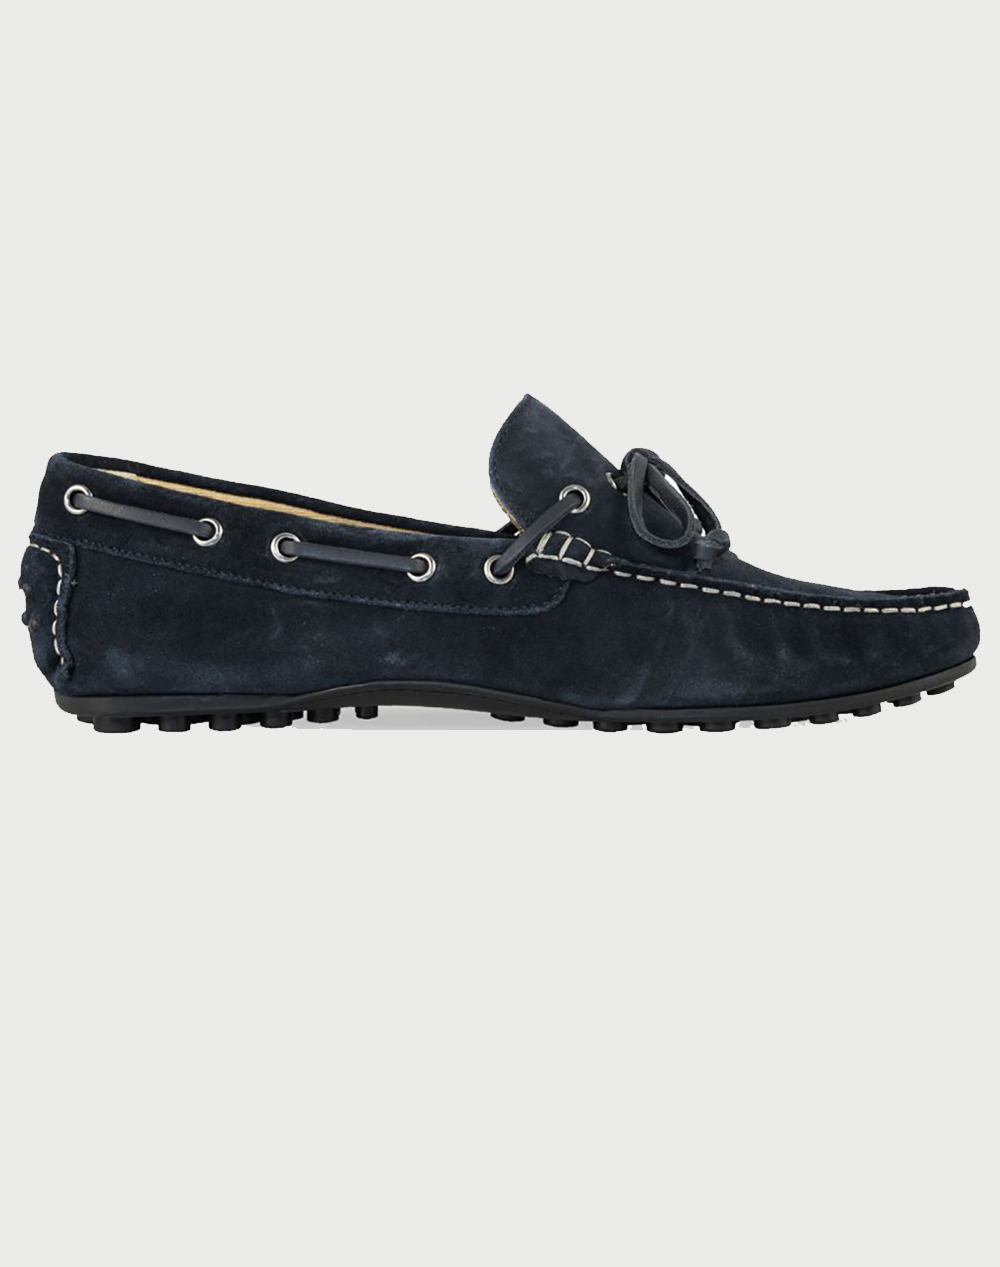 LUMBERJACK MAIN DRIVE MOCASSIN LACE UP SUEDE ΠΑΠΟΥΤΣΙ ΑΝΔΡΙΚΟ